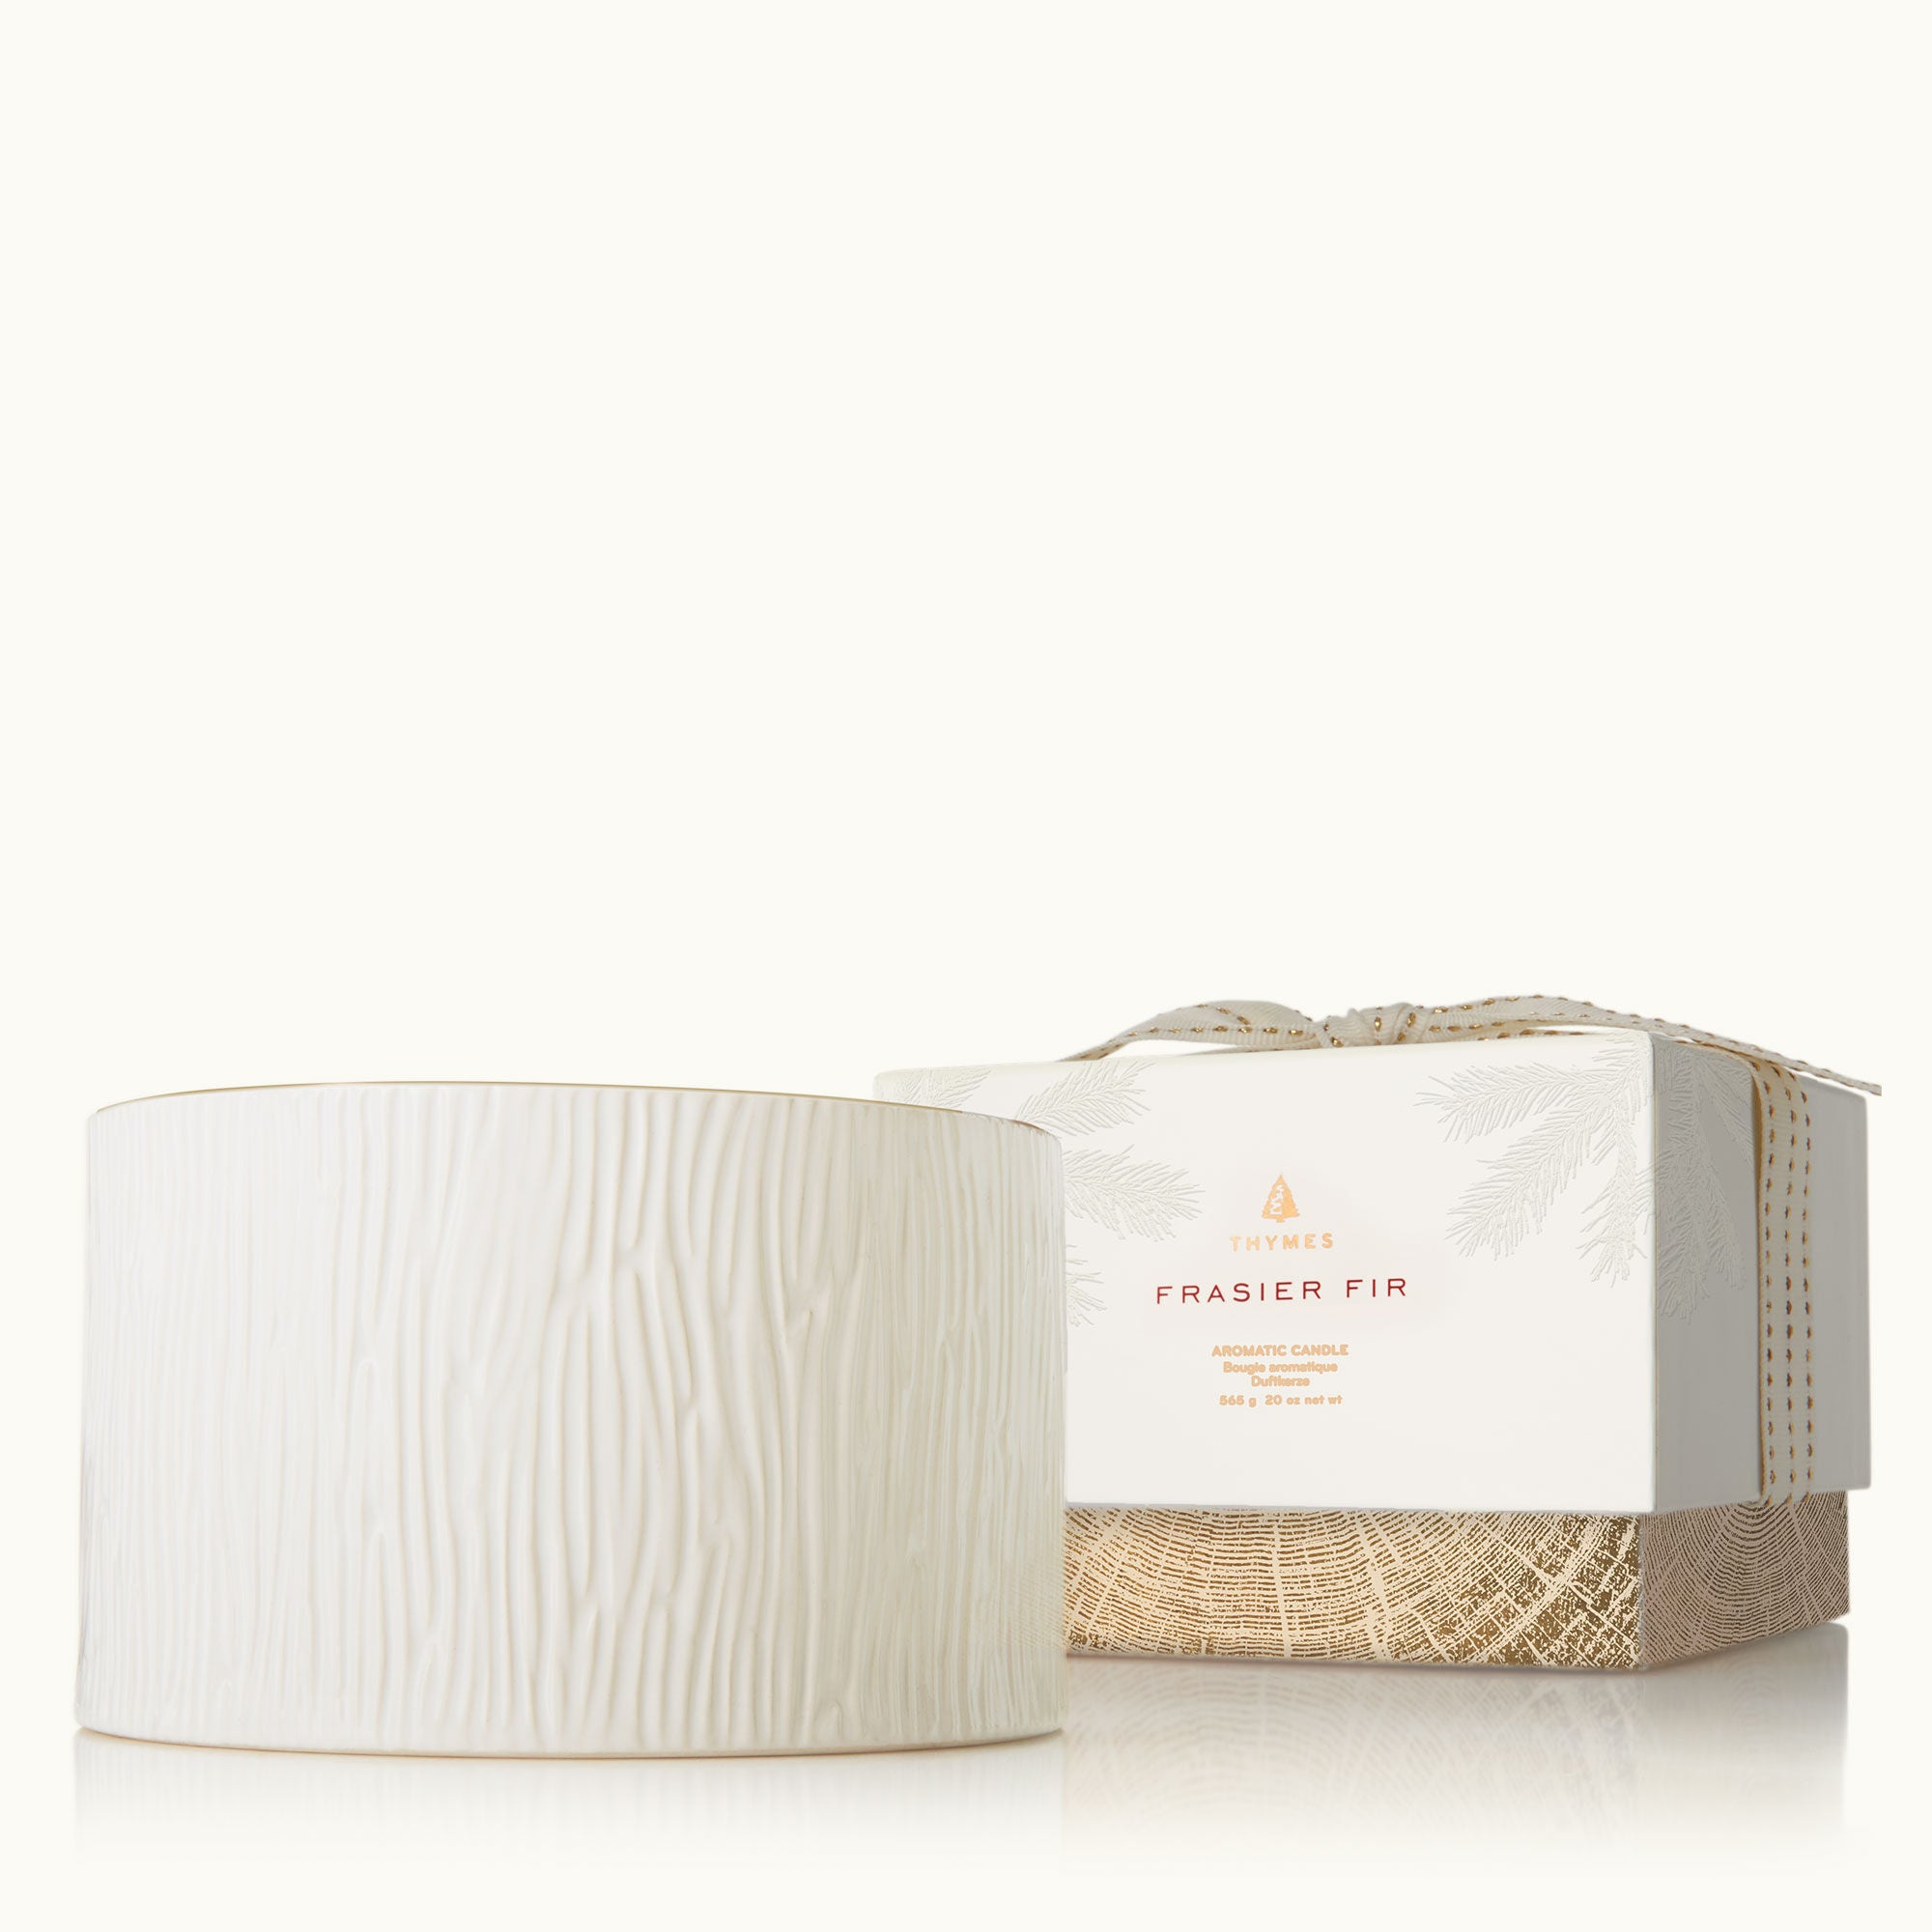 Thymes 3-wick White & Gold Ceramic Candle, Frasier Fir